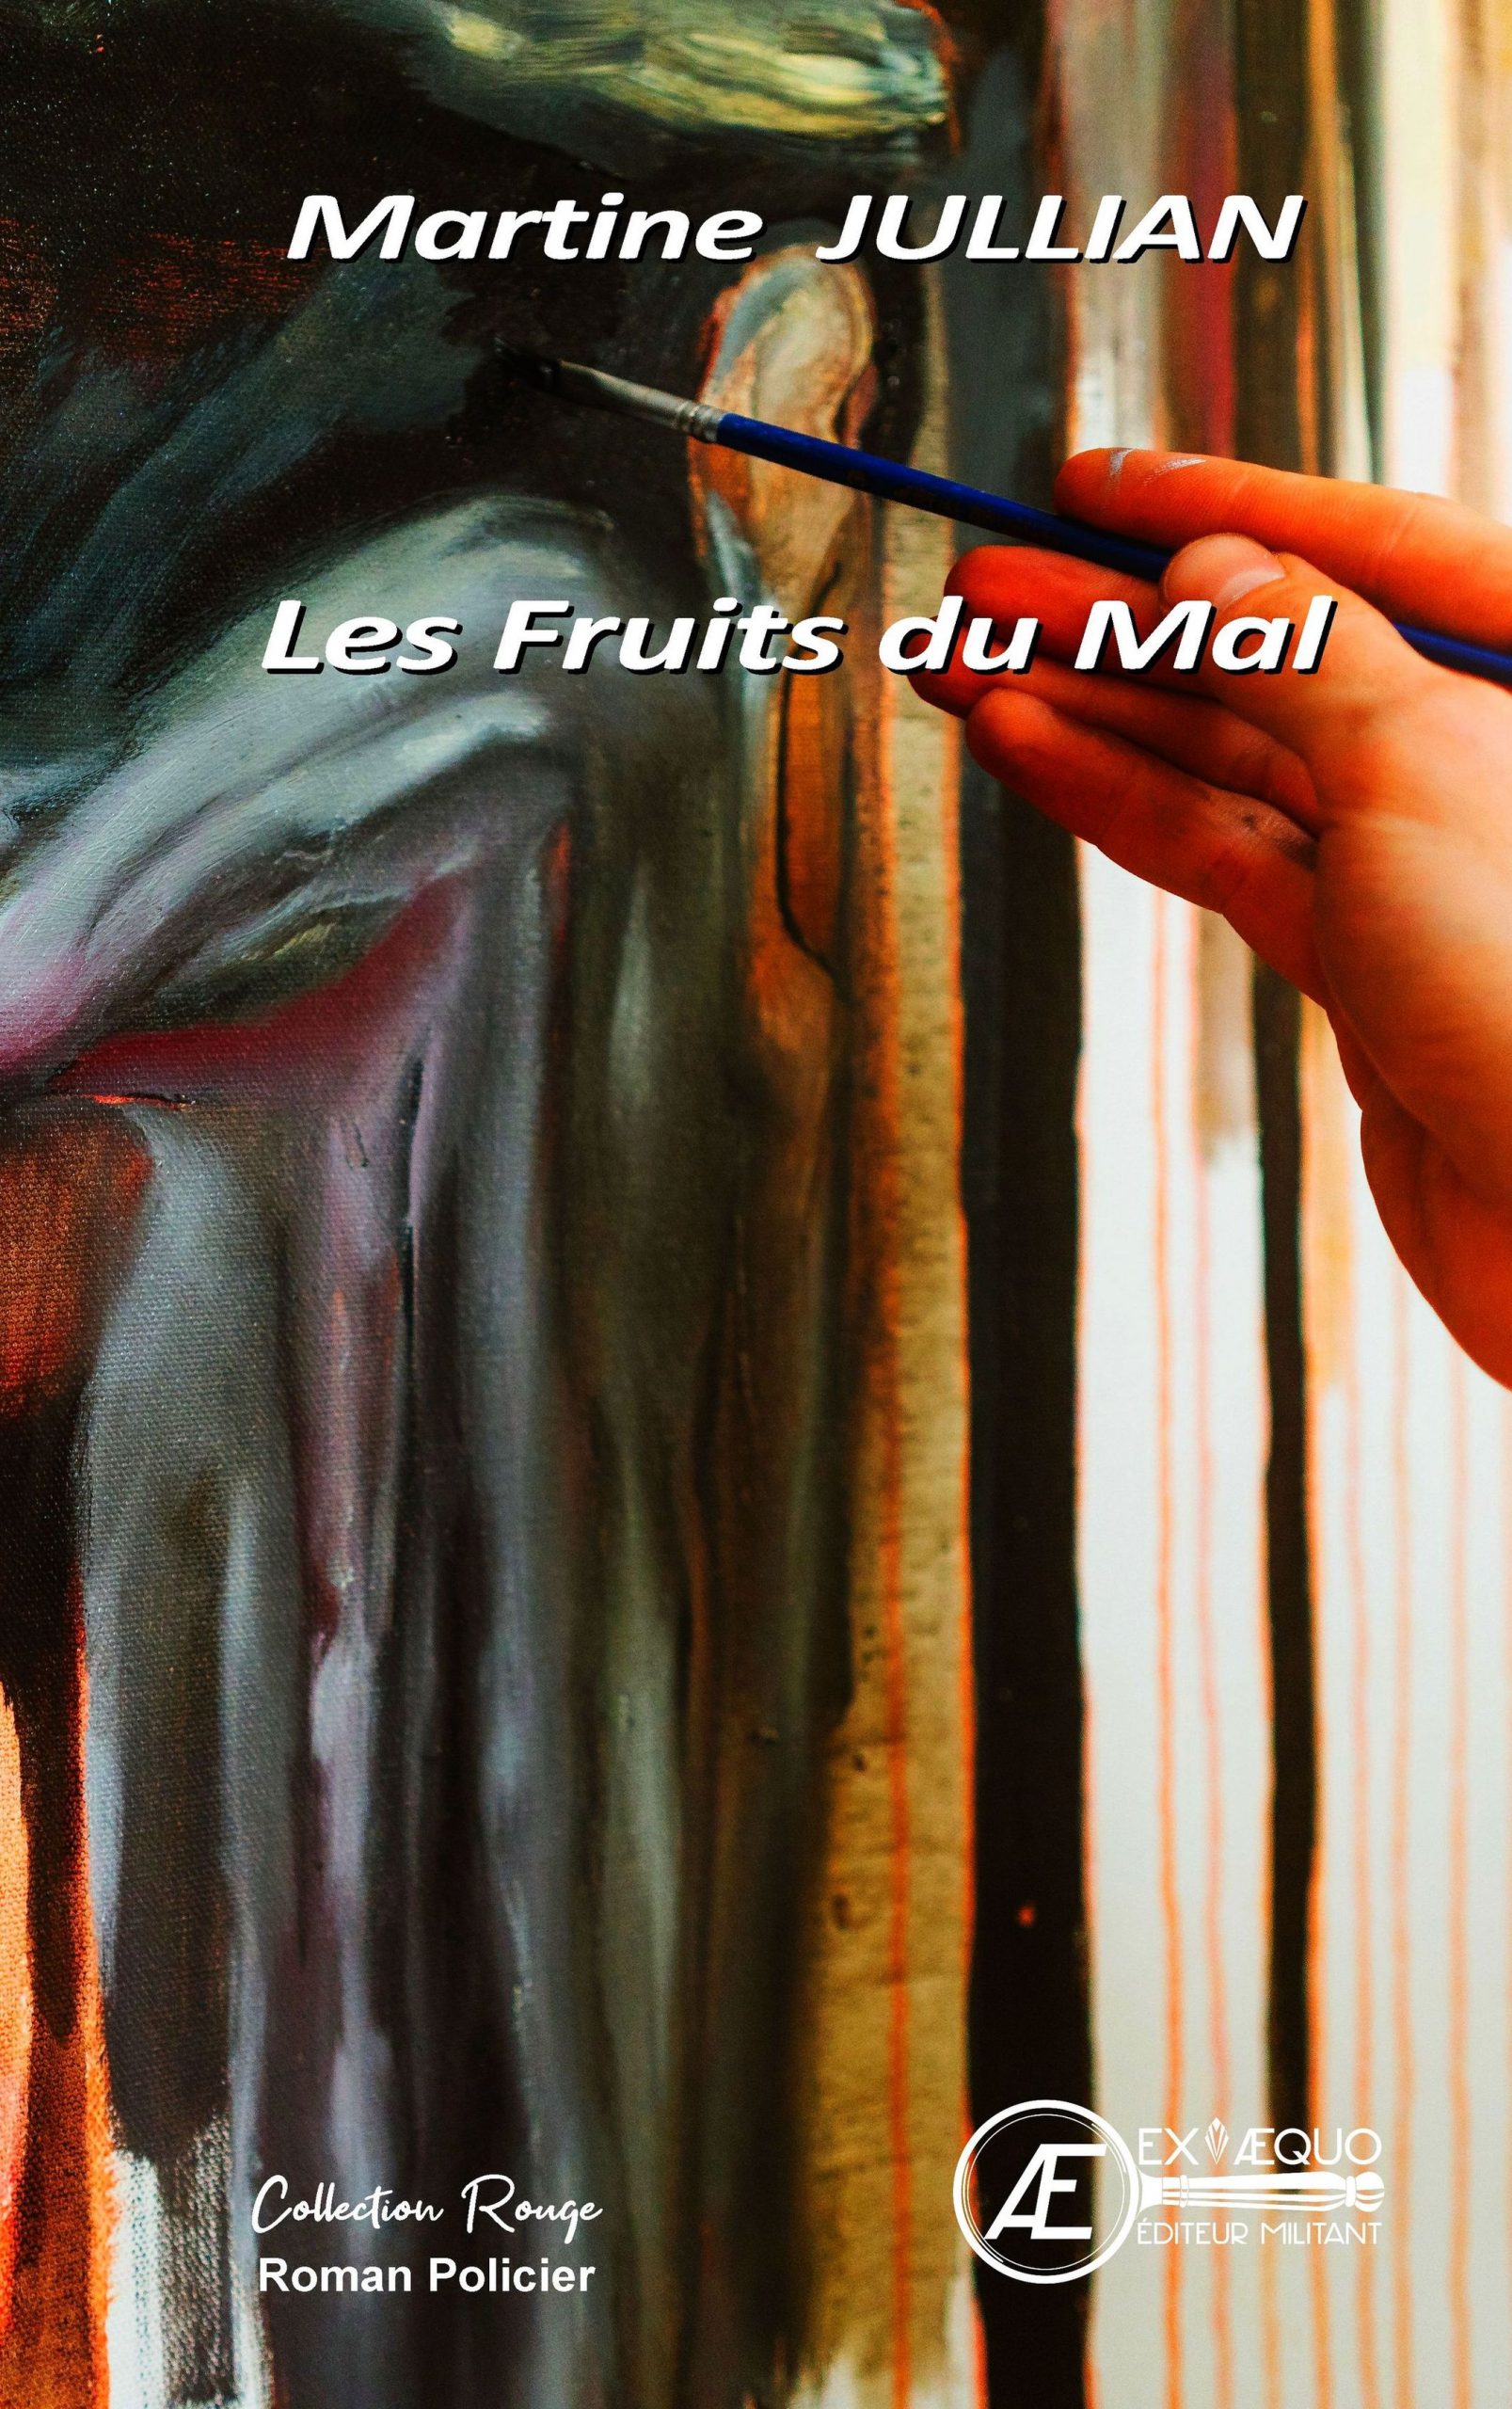 You are currently viewing Les fruits du mal, de Martine Jullian